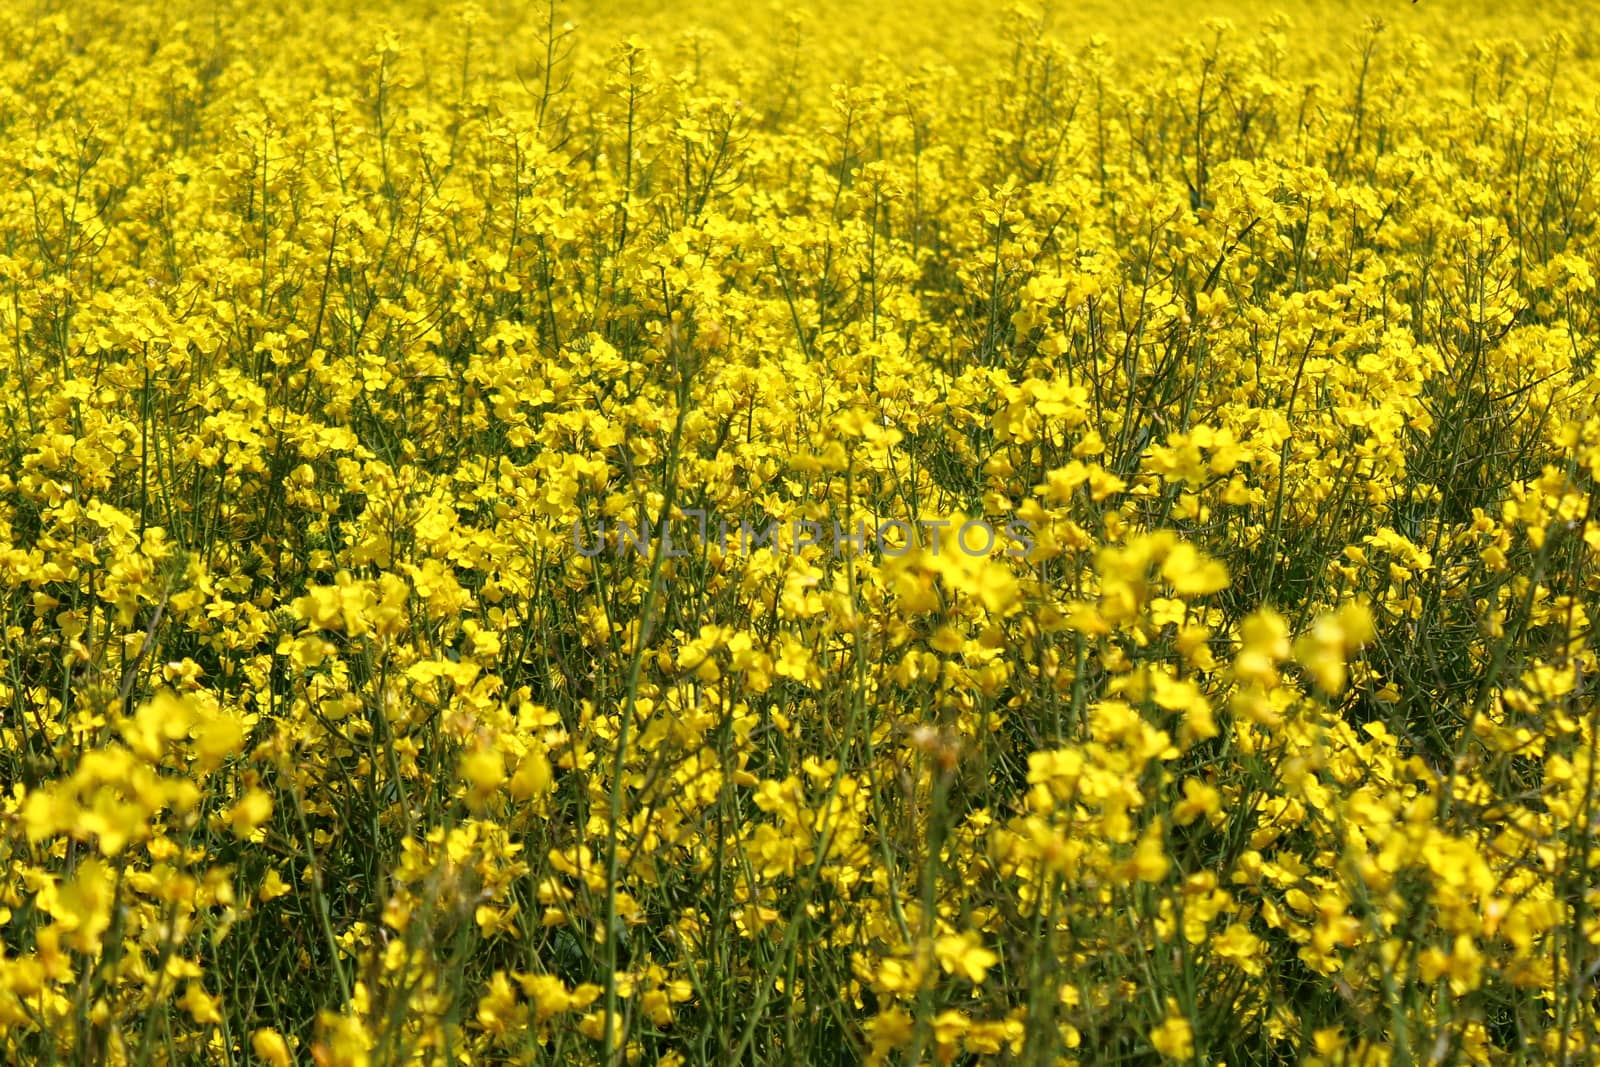 The picture shows a field of blossoming rape in the spring